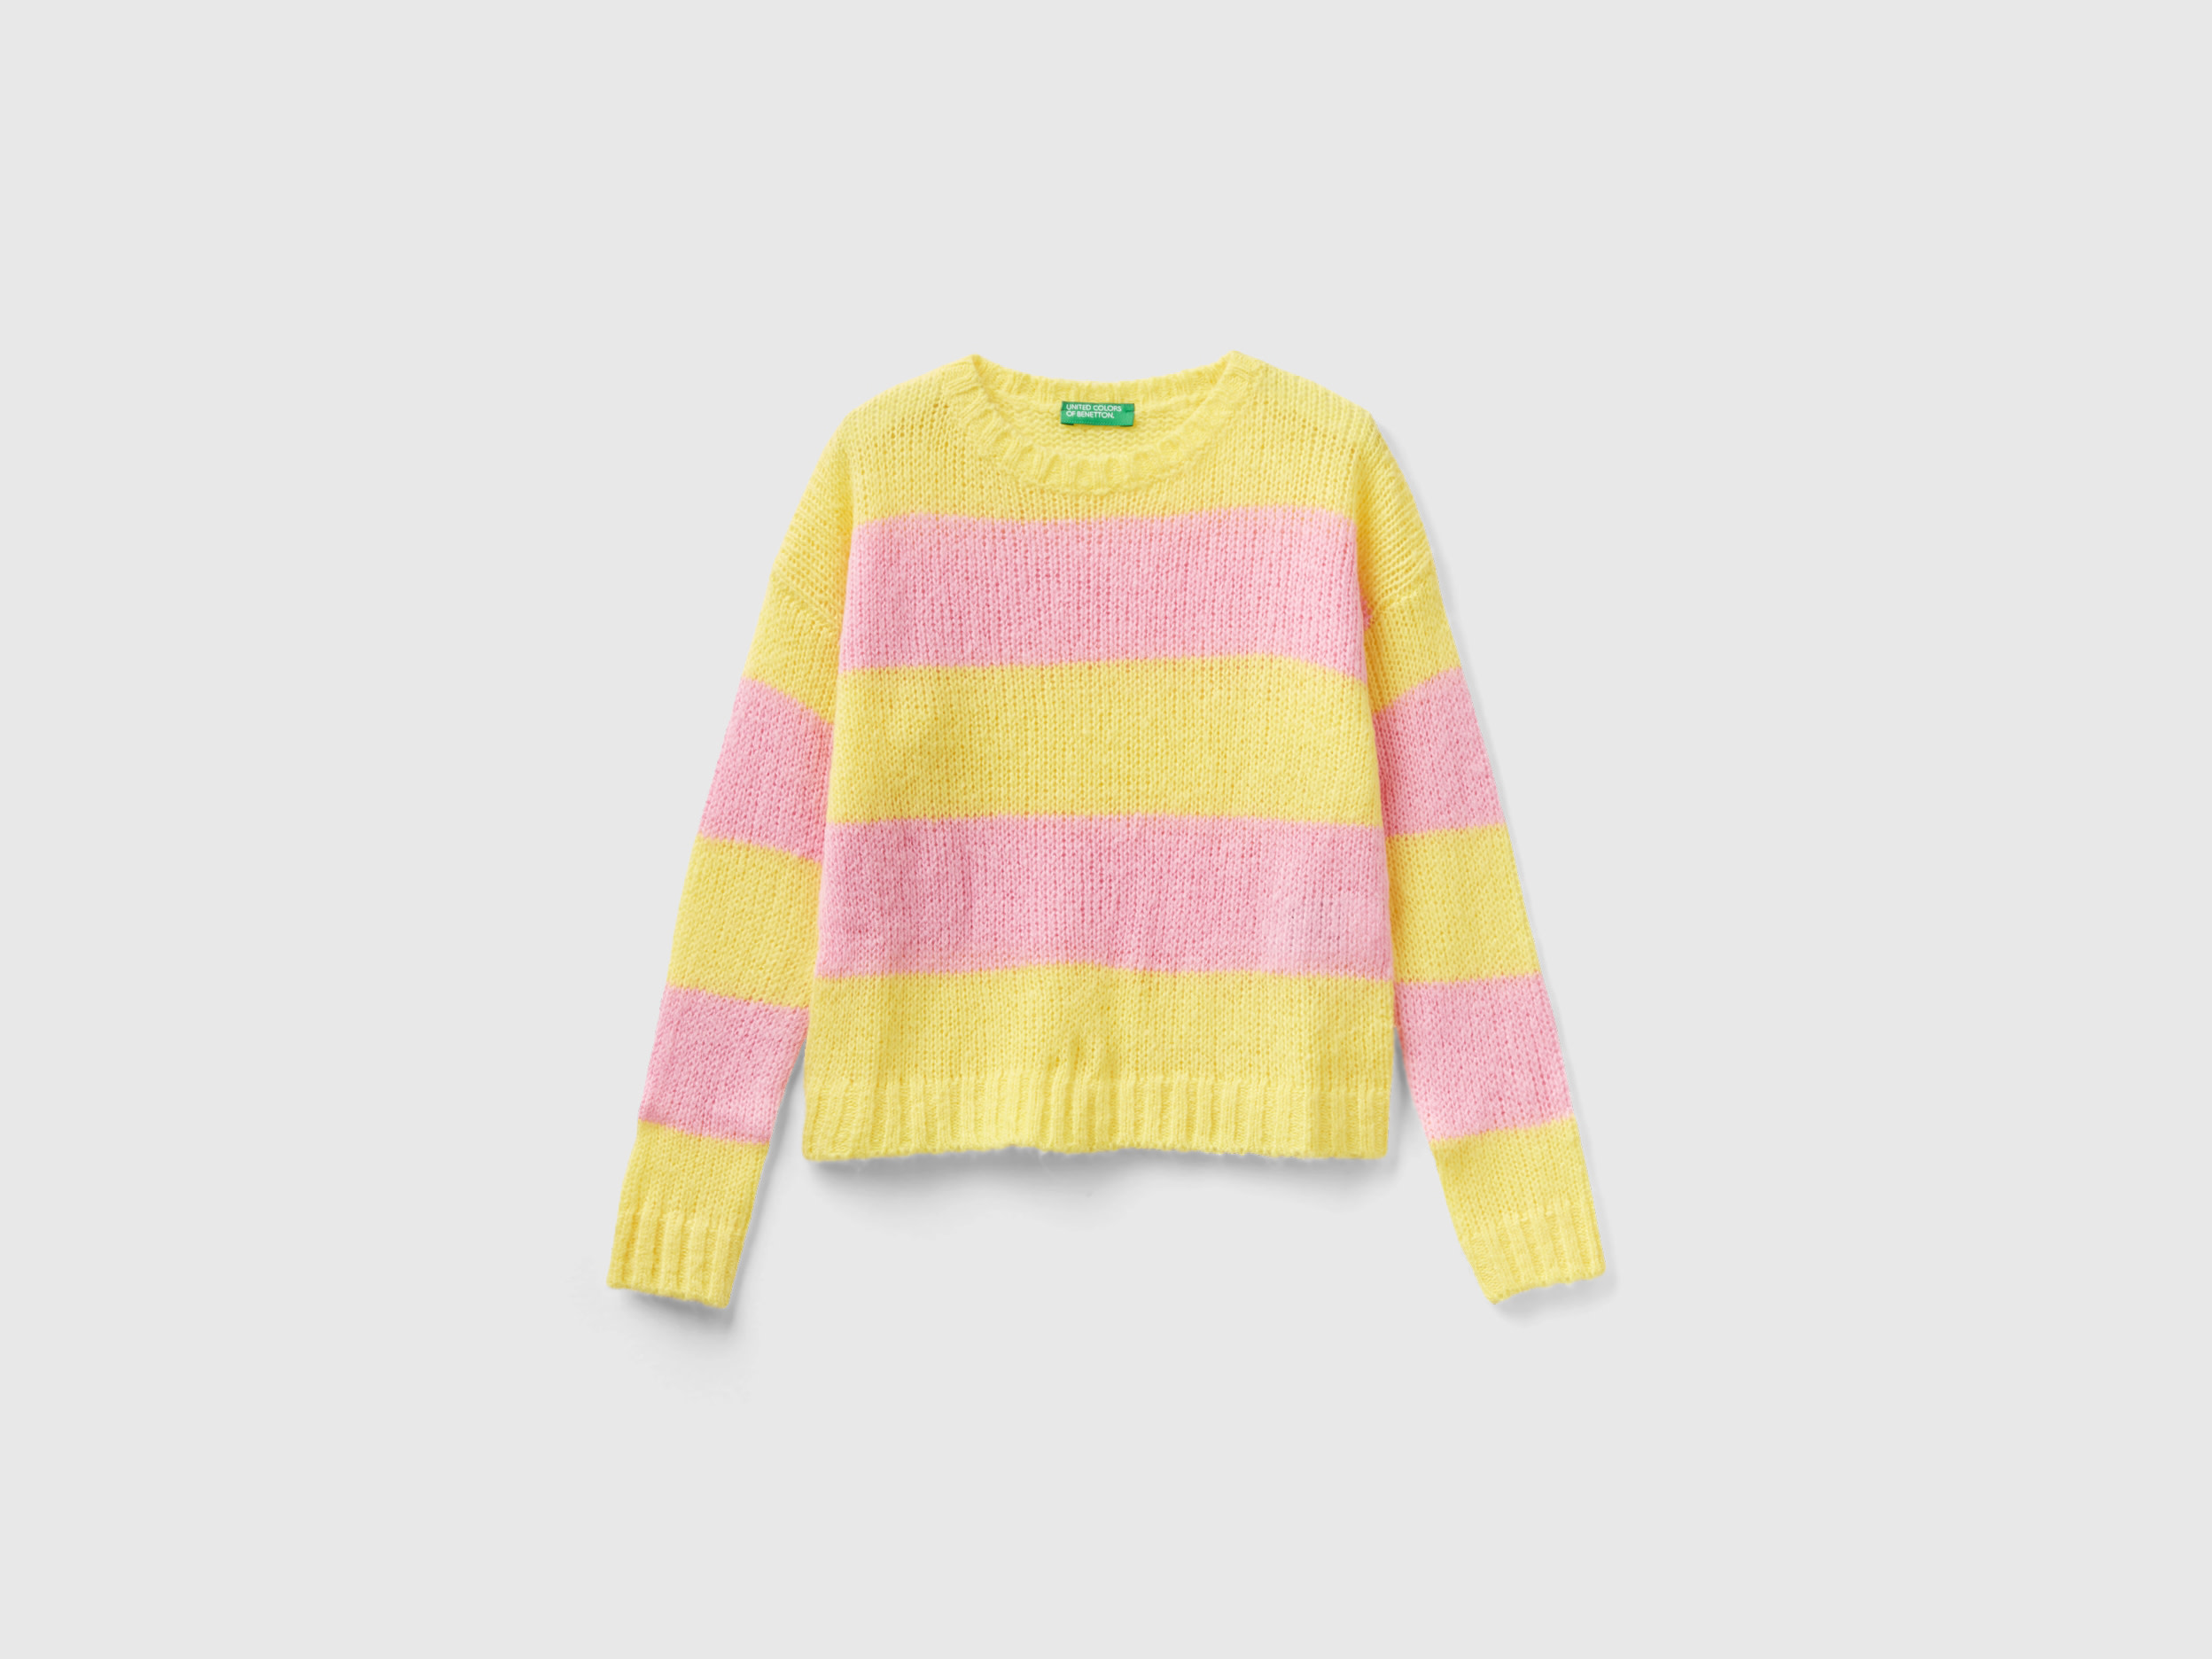 Benetton, Sweater With Two-tone Stripes, size L, Yellow, Kids